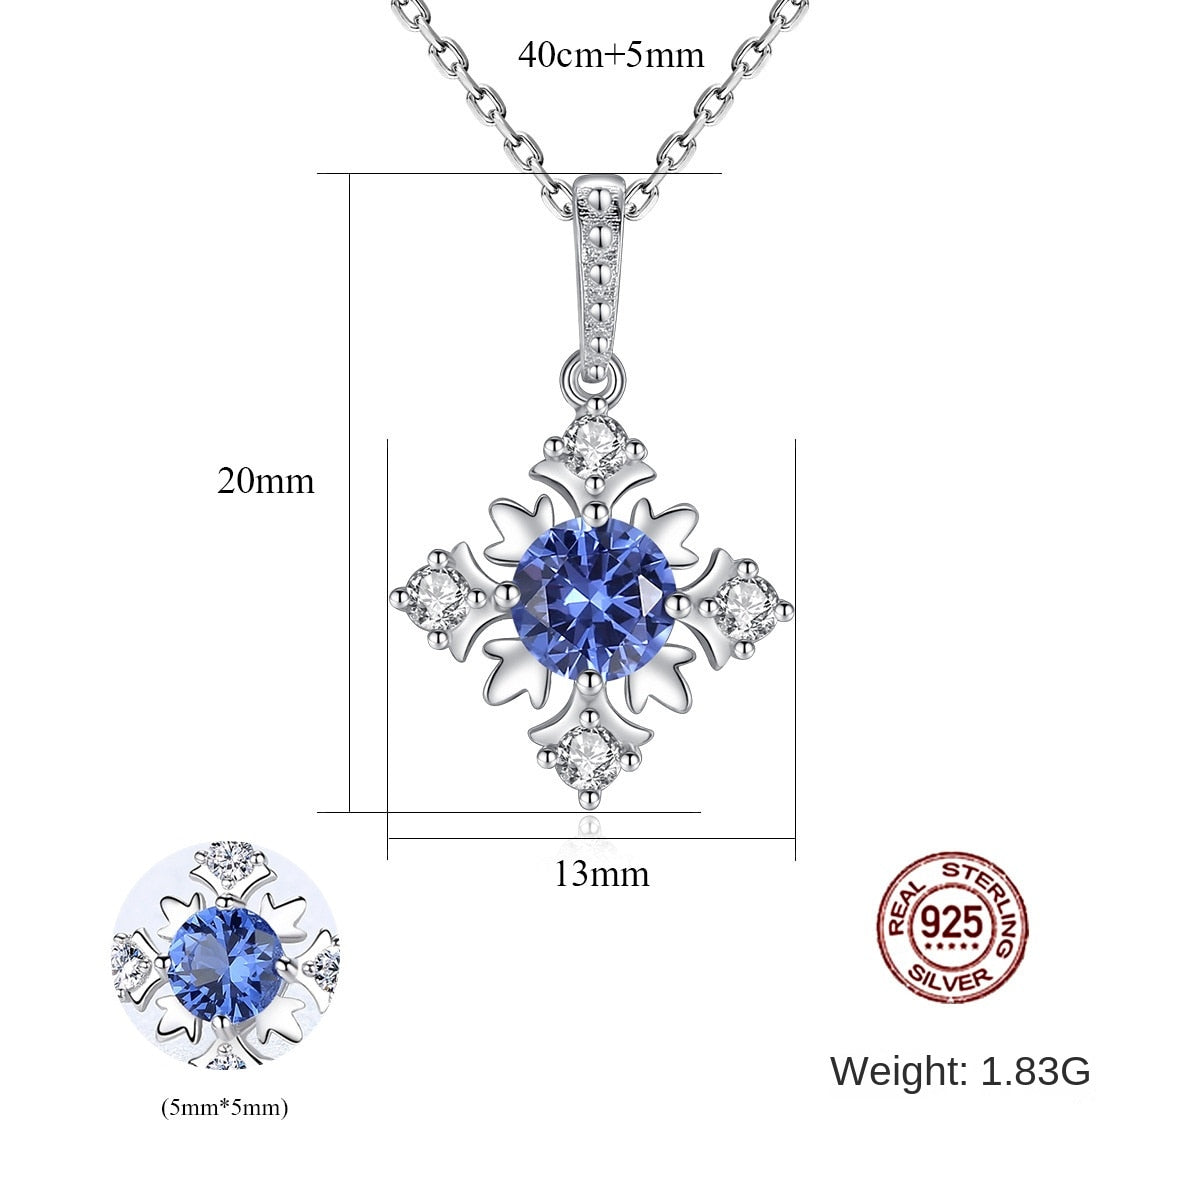 Gemstonely- Sterling Silver Necklace with Colored Simulate Gemstones and Diamonds (Cubic Zirconia)